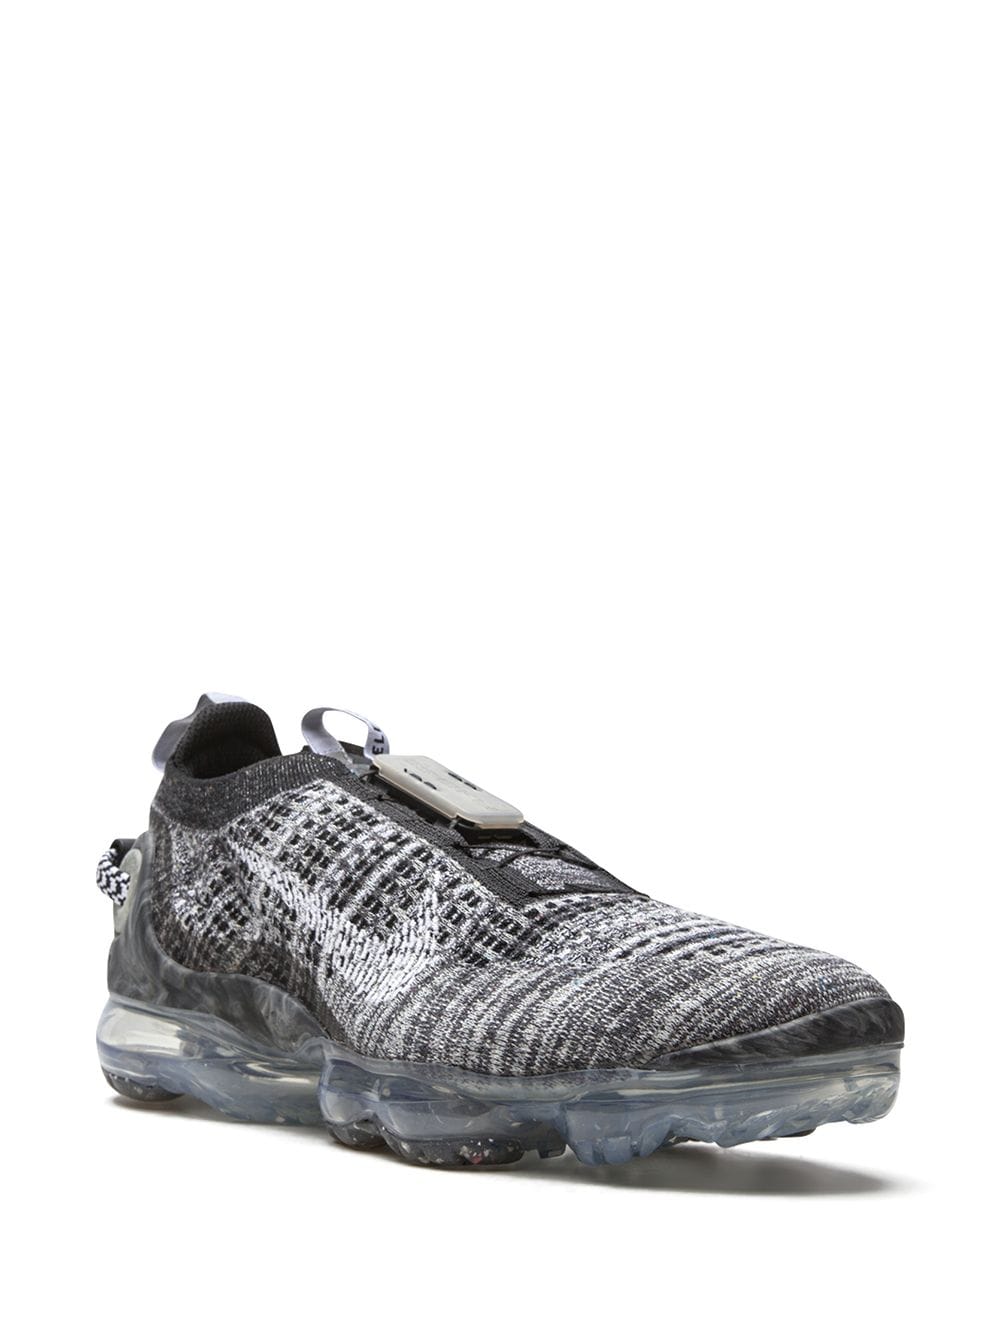 Image 2 of Nike Air Vapormax 2020 "Flyknit Ore" sneakers